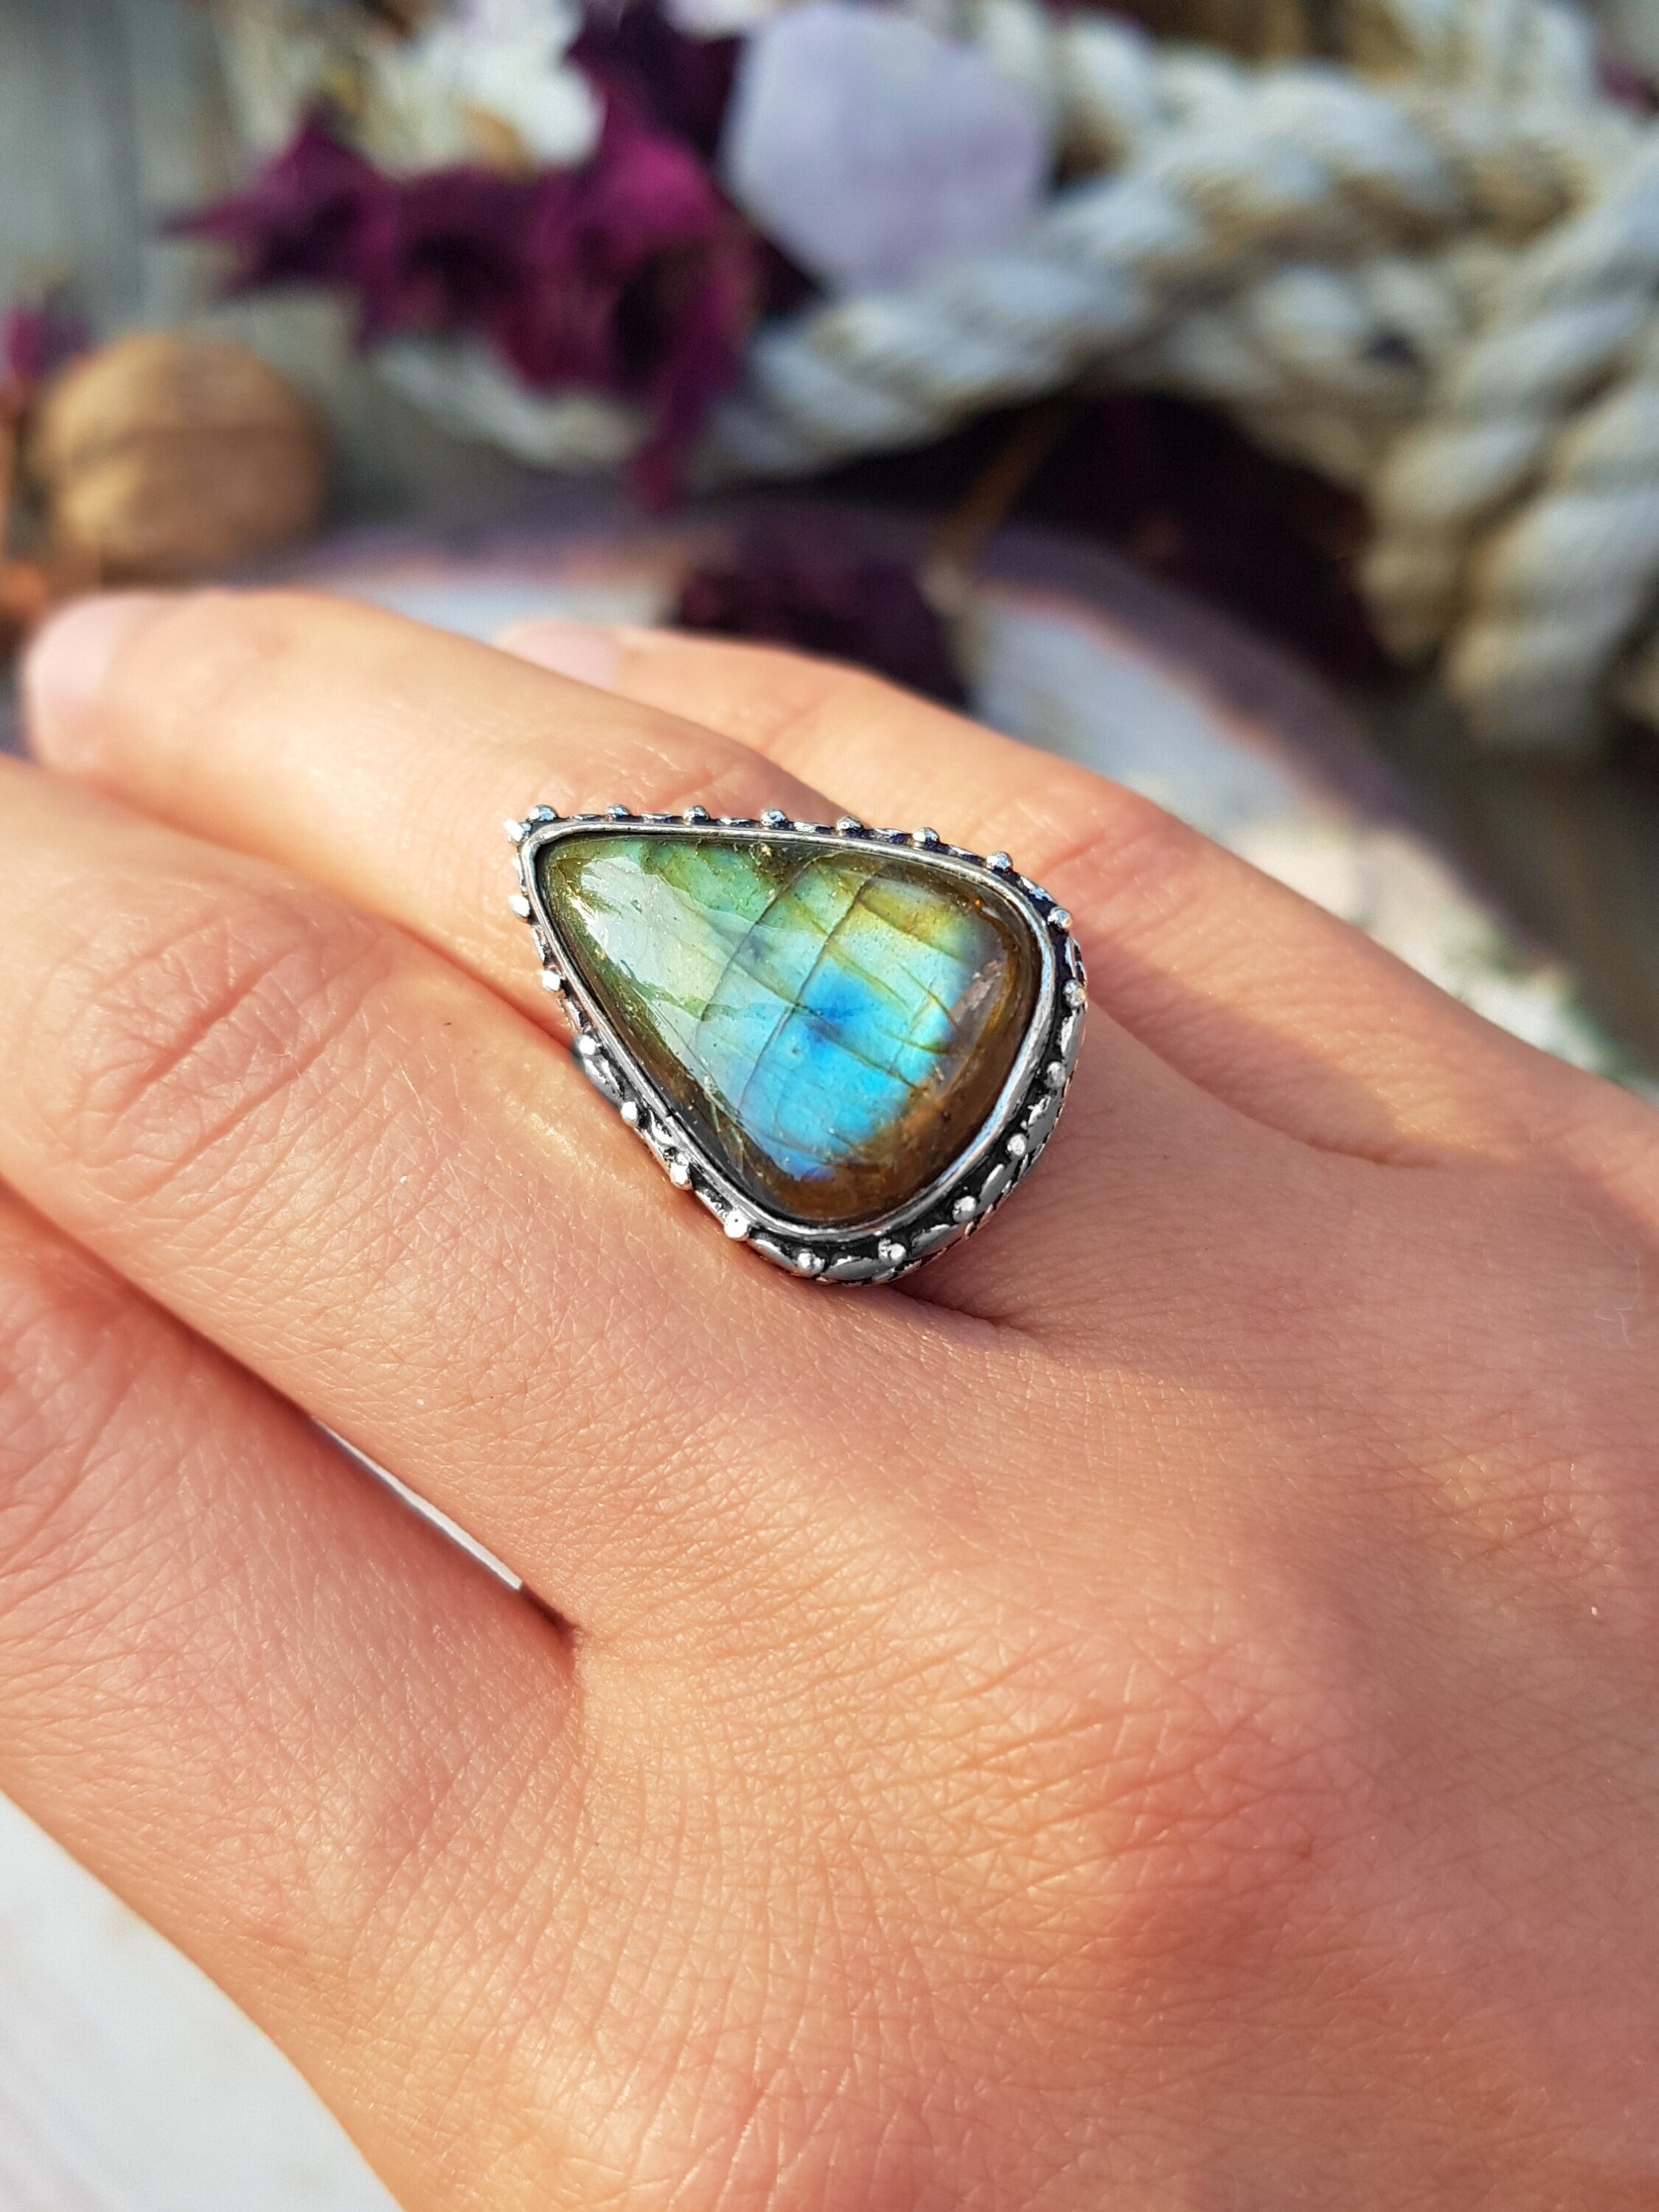 Amazon.com: labradorite ring, 925 sterling silver, bohemian jewelry, blue  flashy stone ring, statement ring, victorian ring, bridal ring, wedding ring,  unique rings, gypsy ring, artisan ring, antique ring, gifts : Handmade  Products